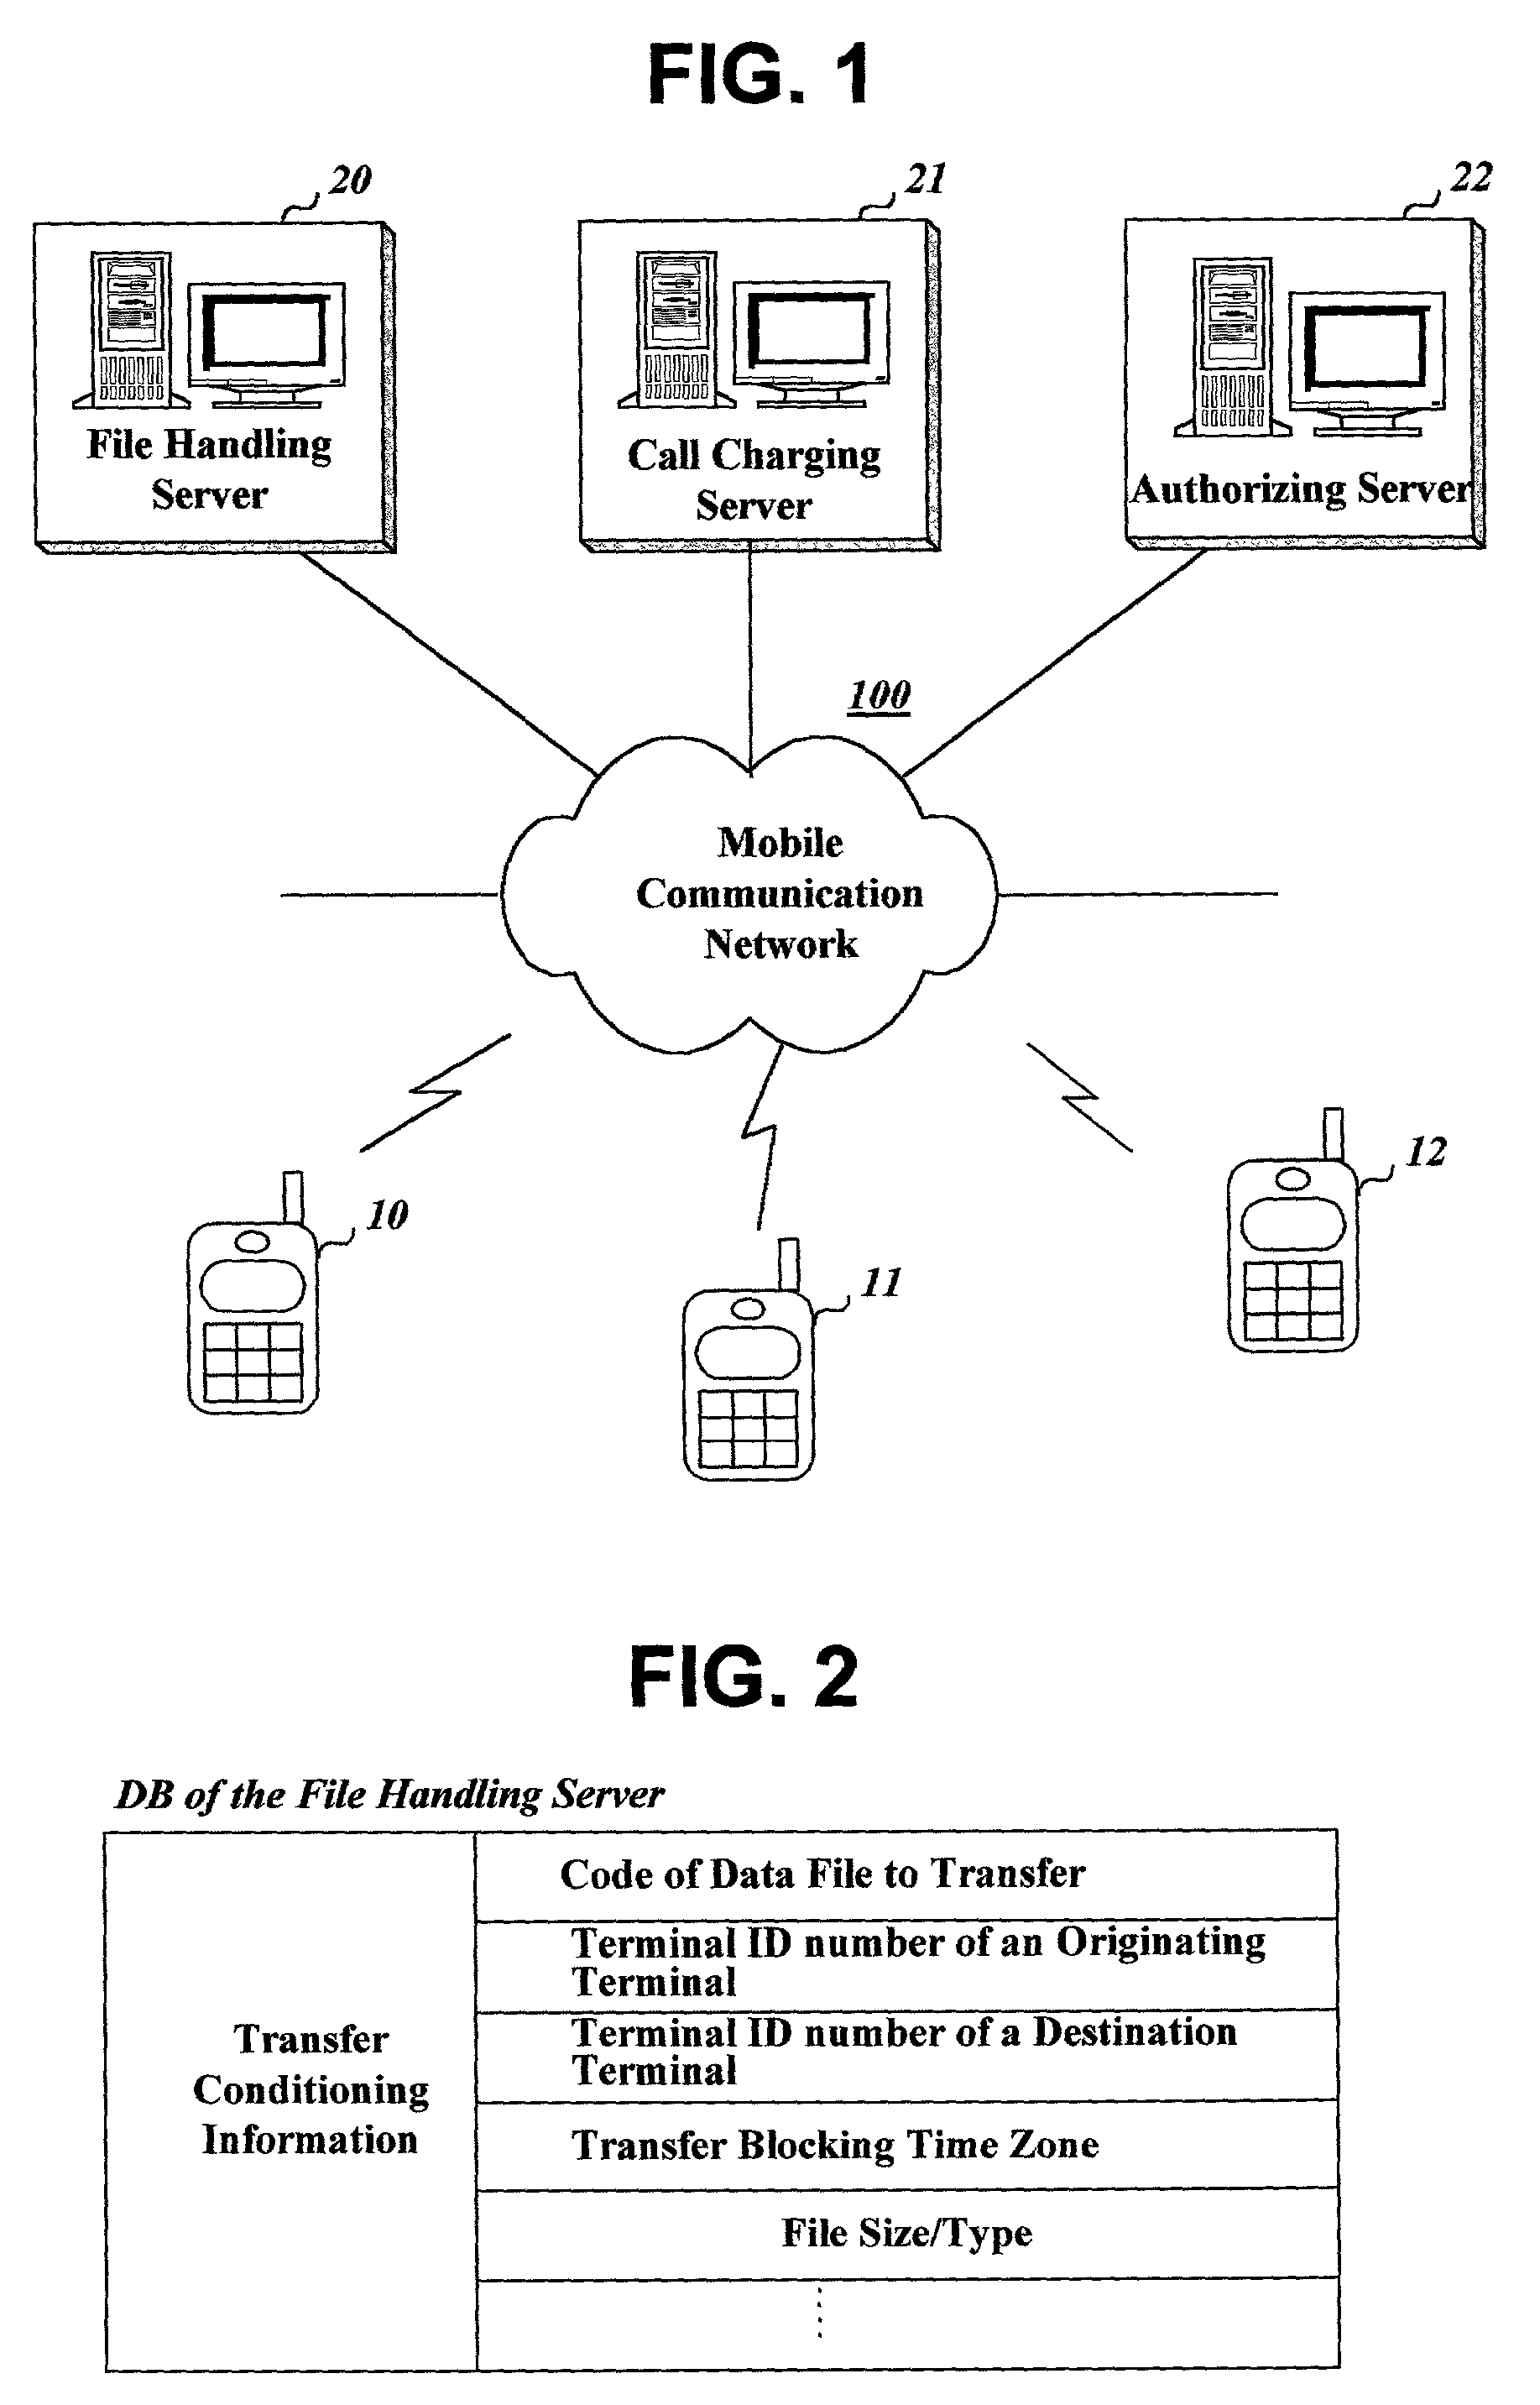 Method of providing a file transfer service through a mobile communication network